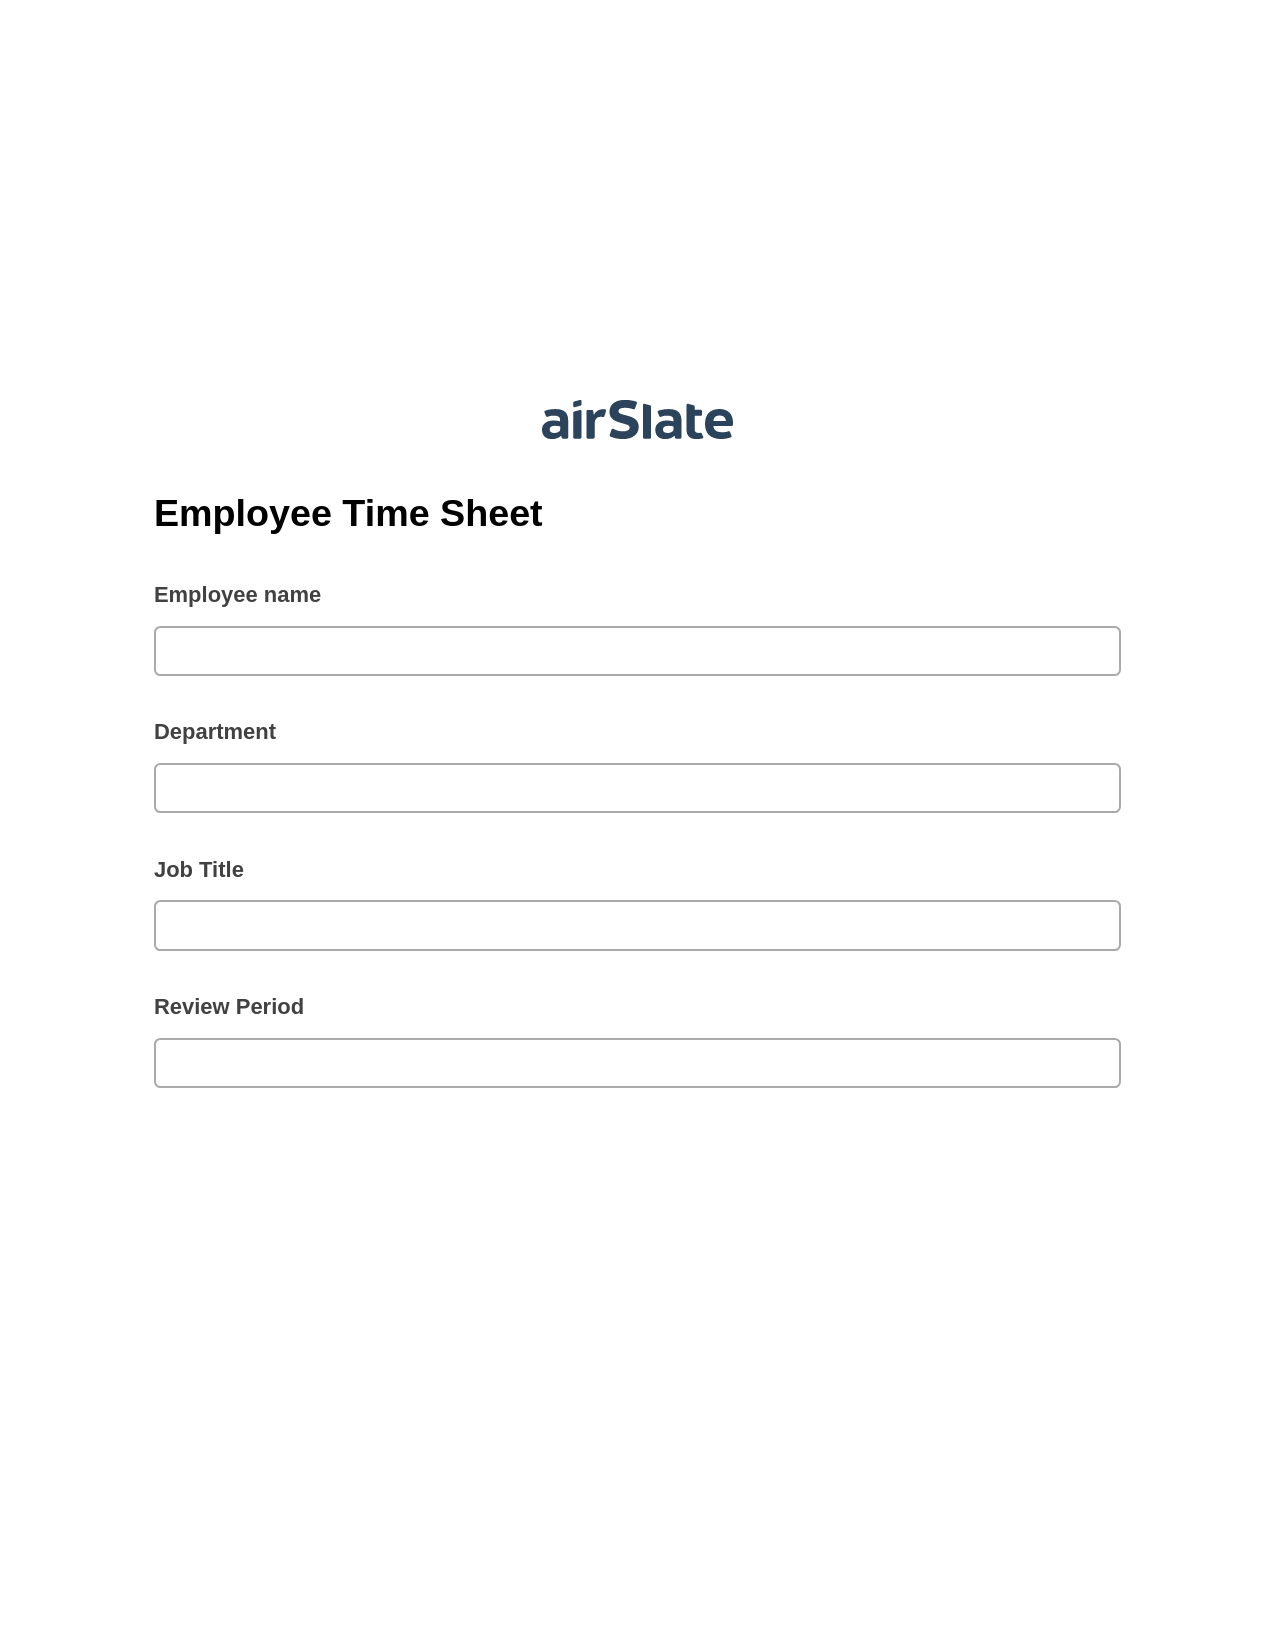 Multirole Employee Time Sheet Pre-fill from MS Dynamics 365 Records, Create Salesforce Records Bot, Post-finish Document Bot